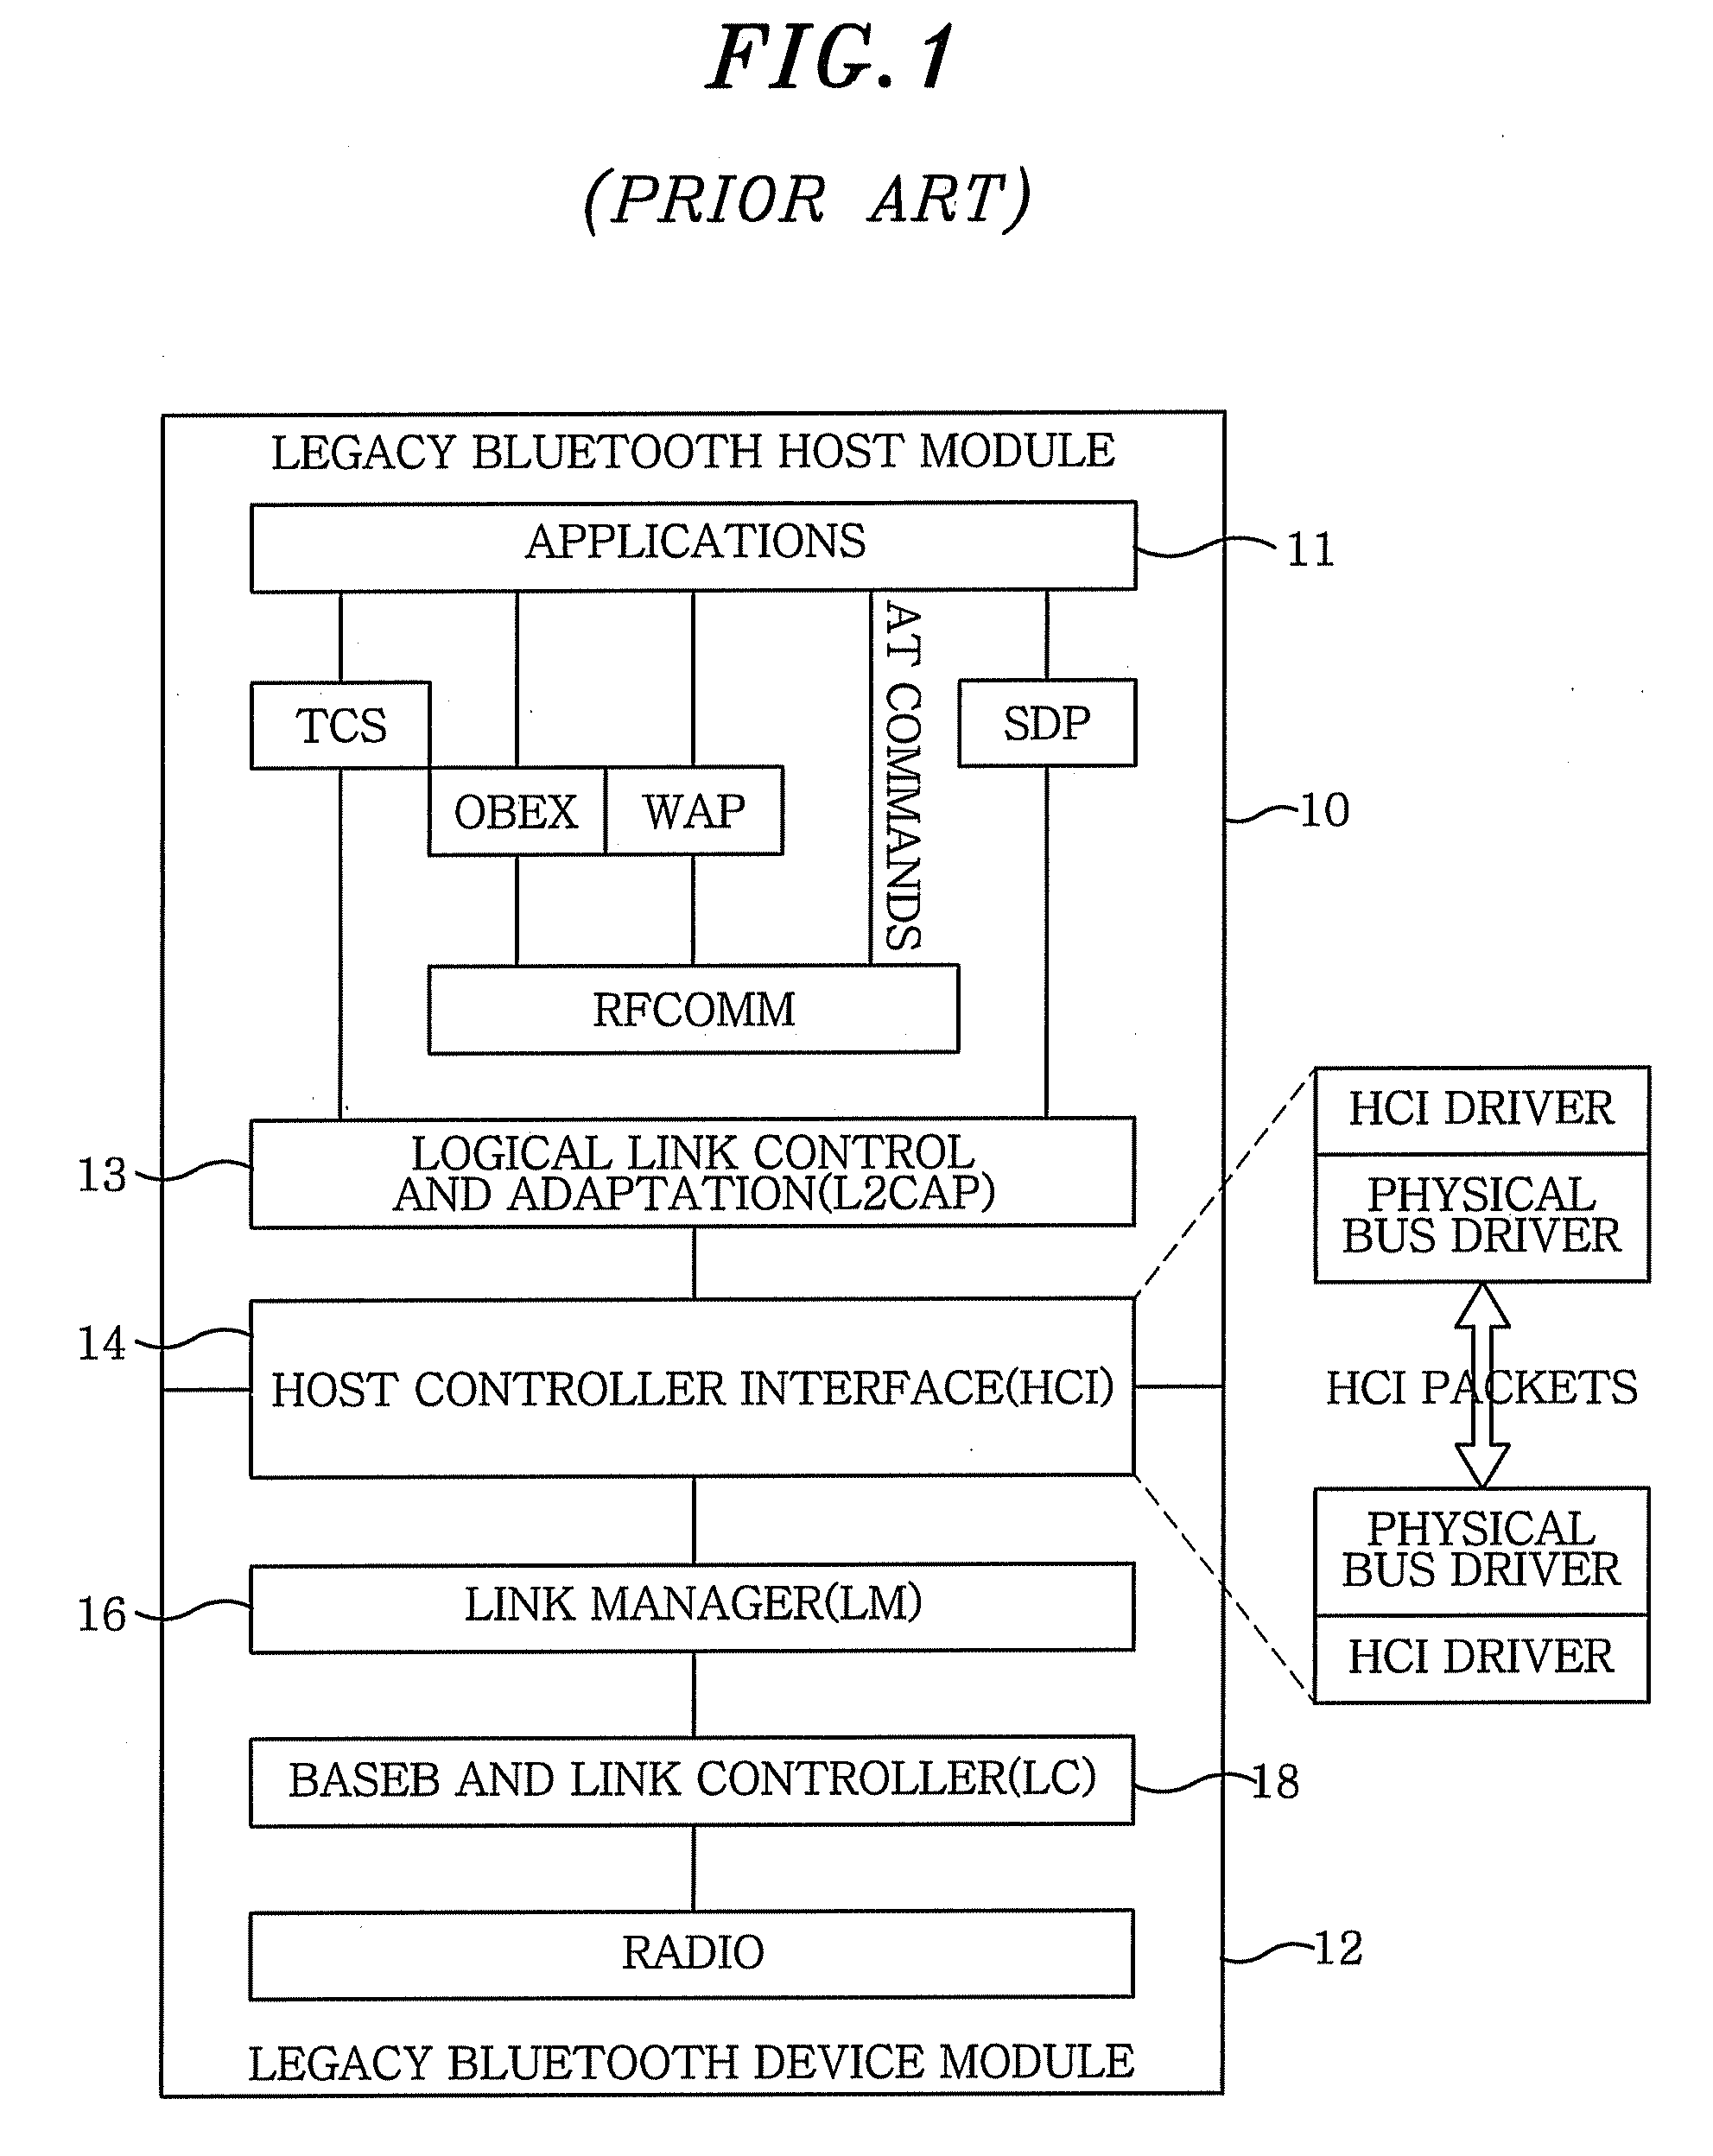 Local area wireless communication apparatus and method